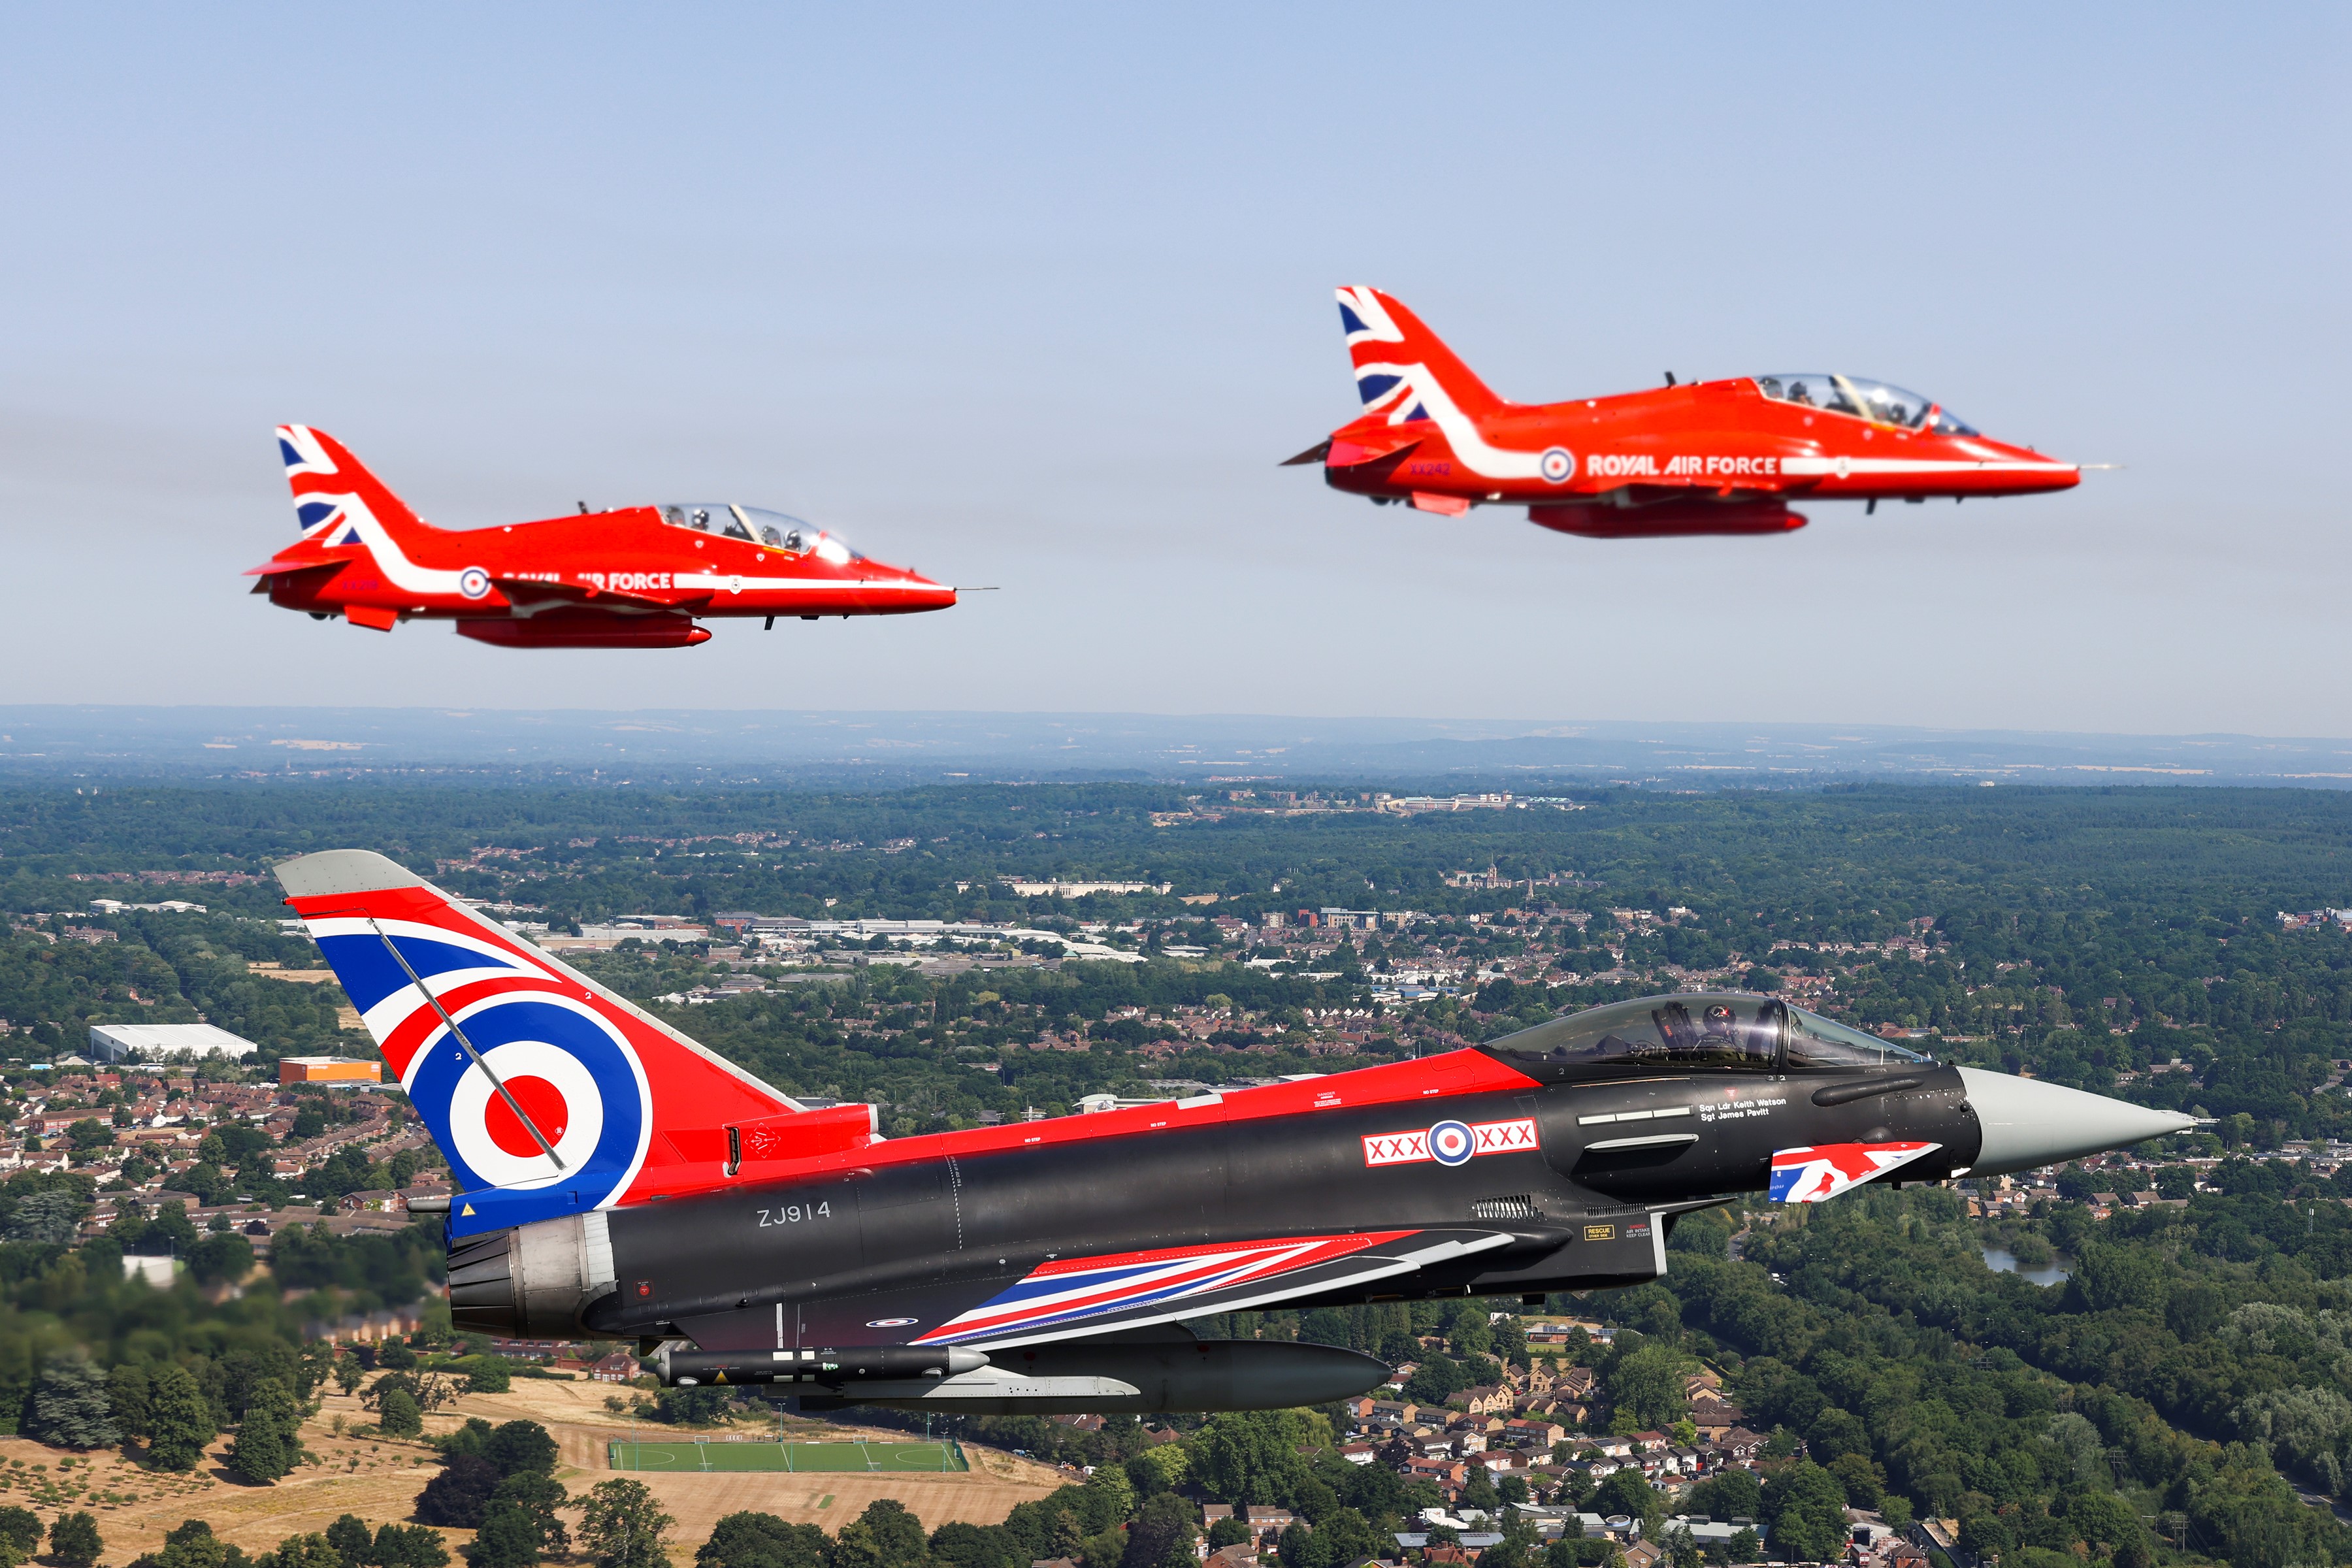 The Red Arrows alongside an RAF Typhoon - the type of aircraft flown by Flt Lt Hansford on the frontline.